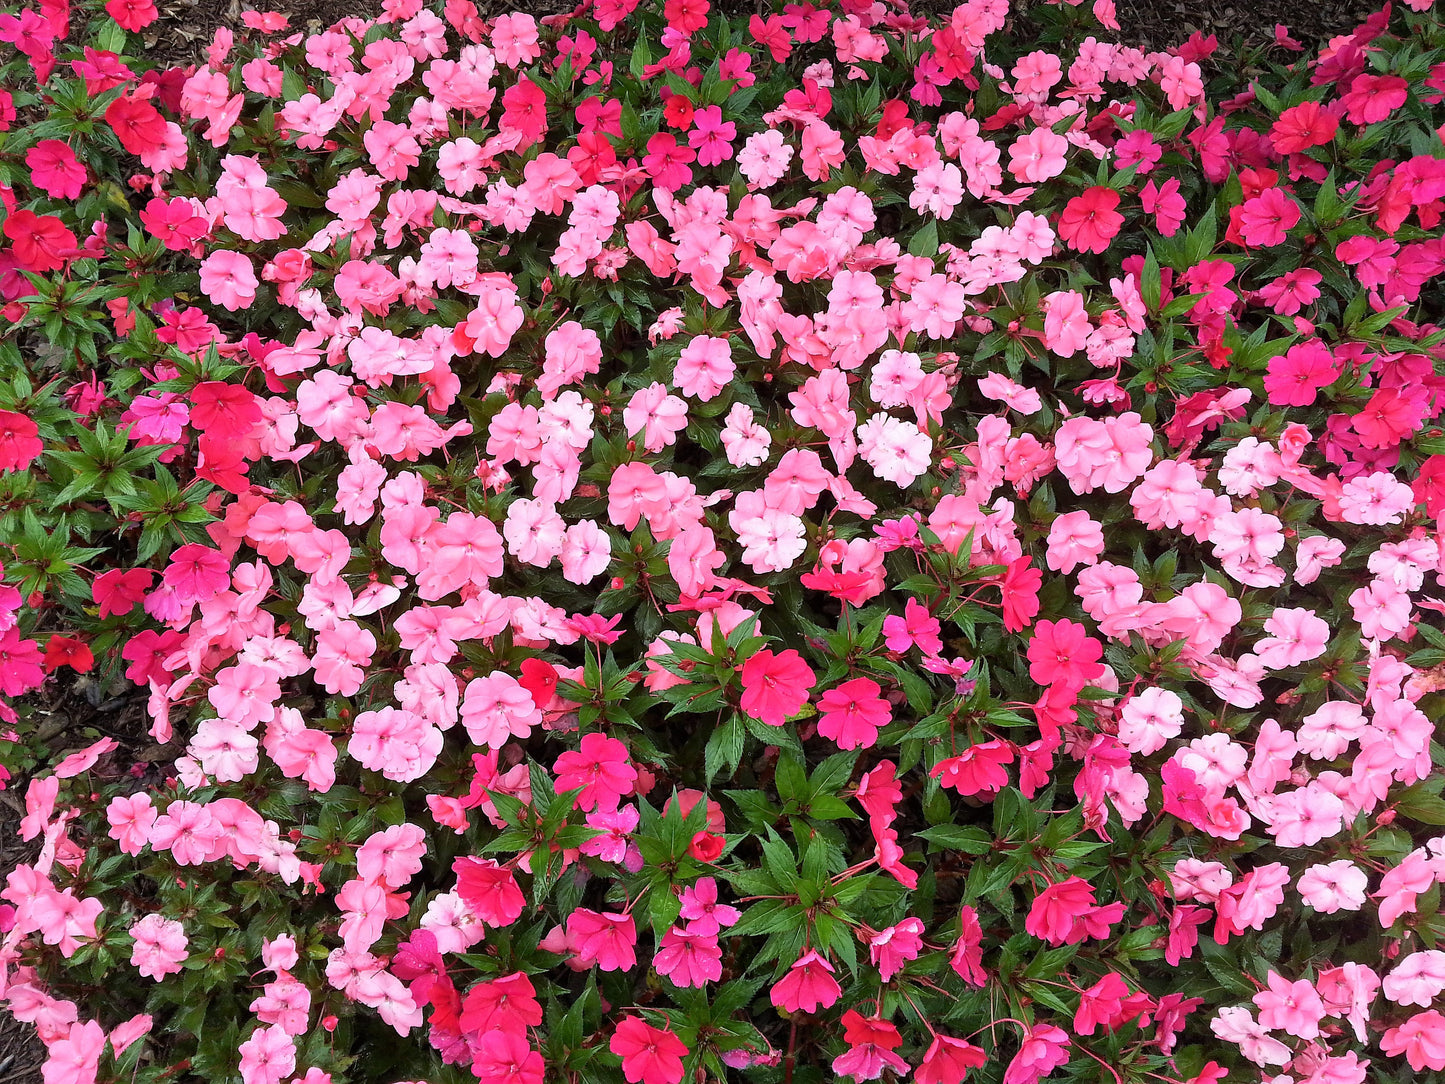 50 MIXED COLORS Dwarf IMPATIENS Walleriana Sun or Full Shade Red, White, Pink, Carmine, Scarlet, & Orange Flower Seeds